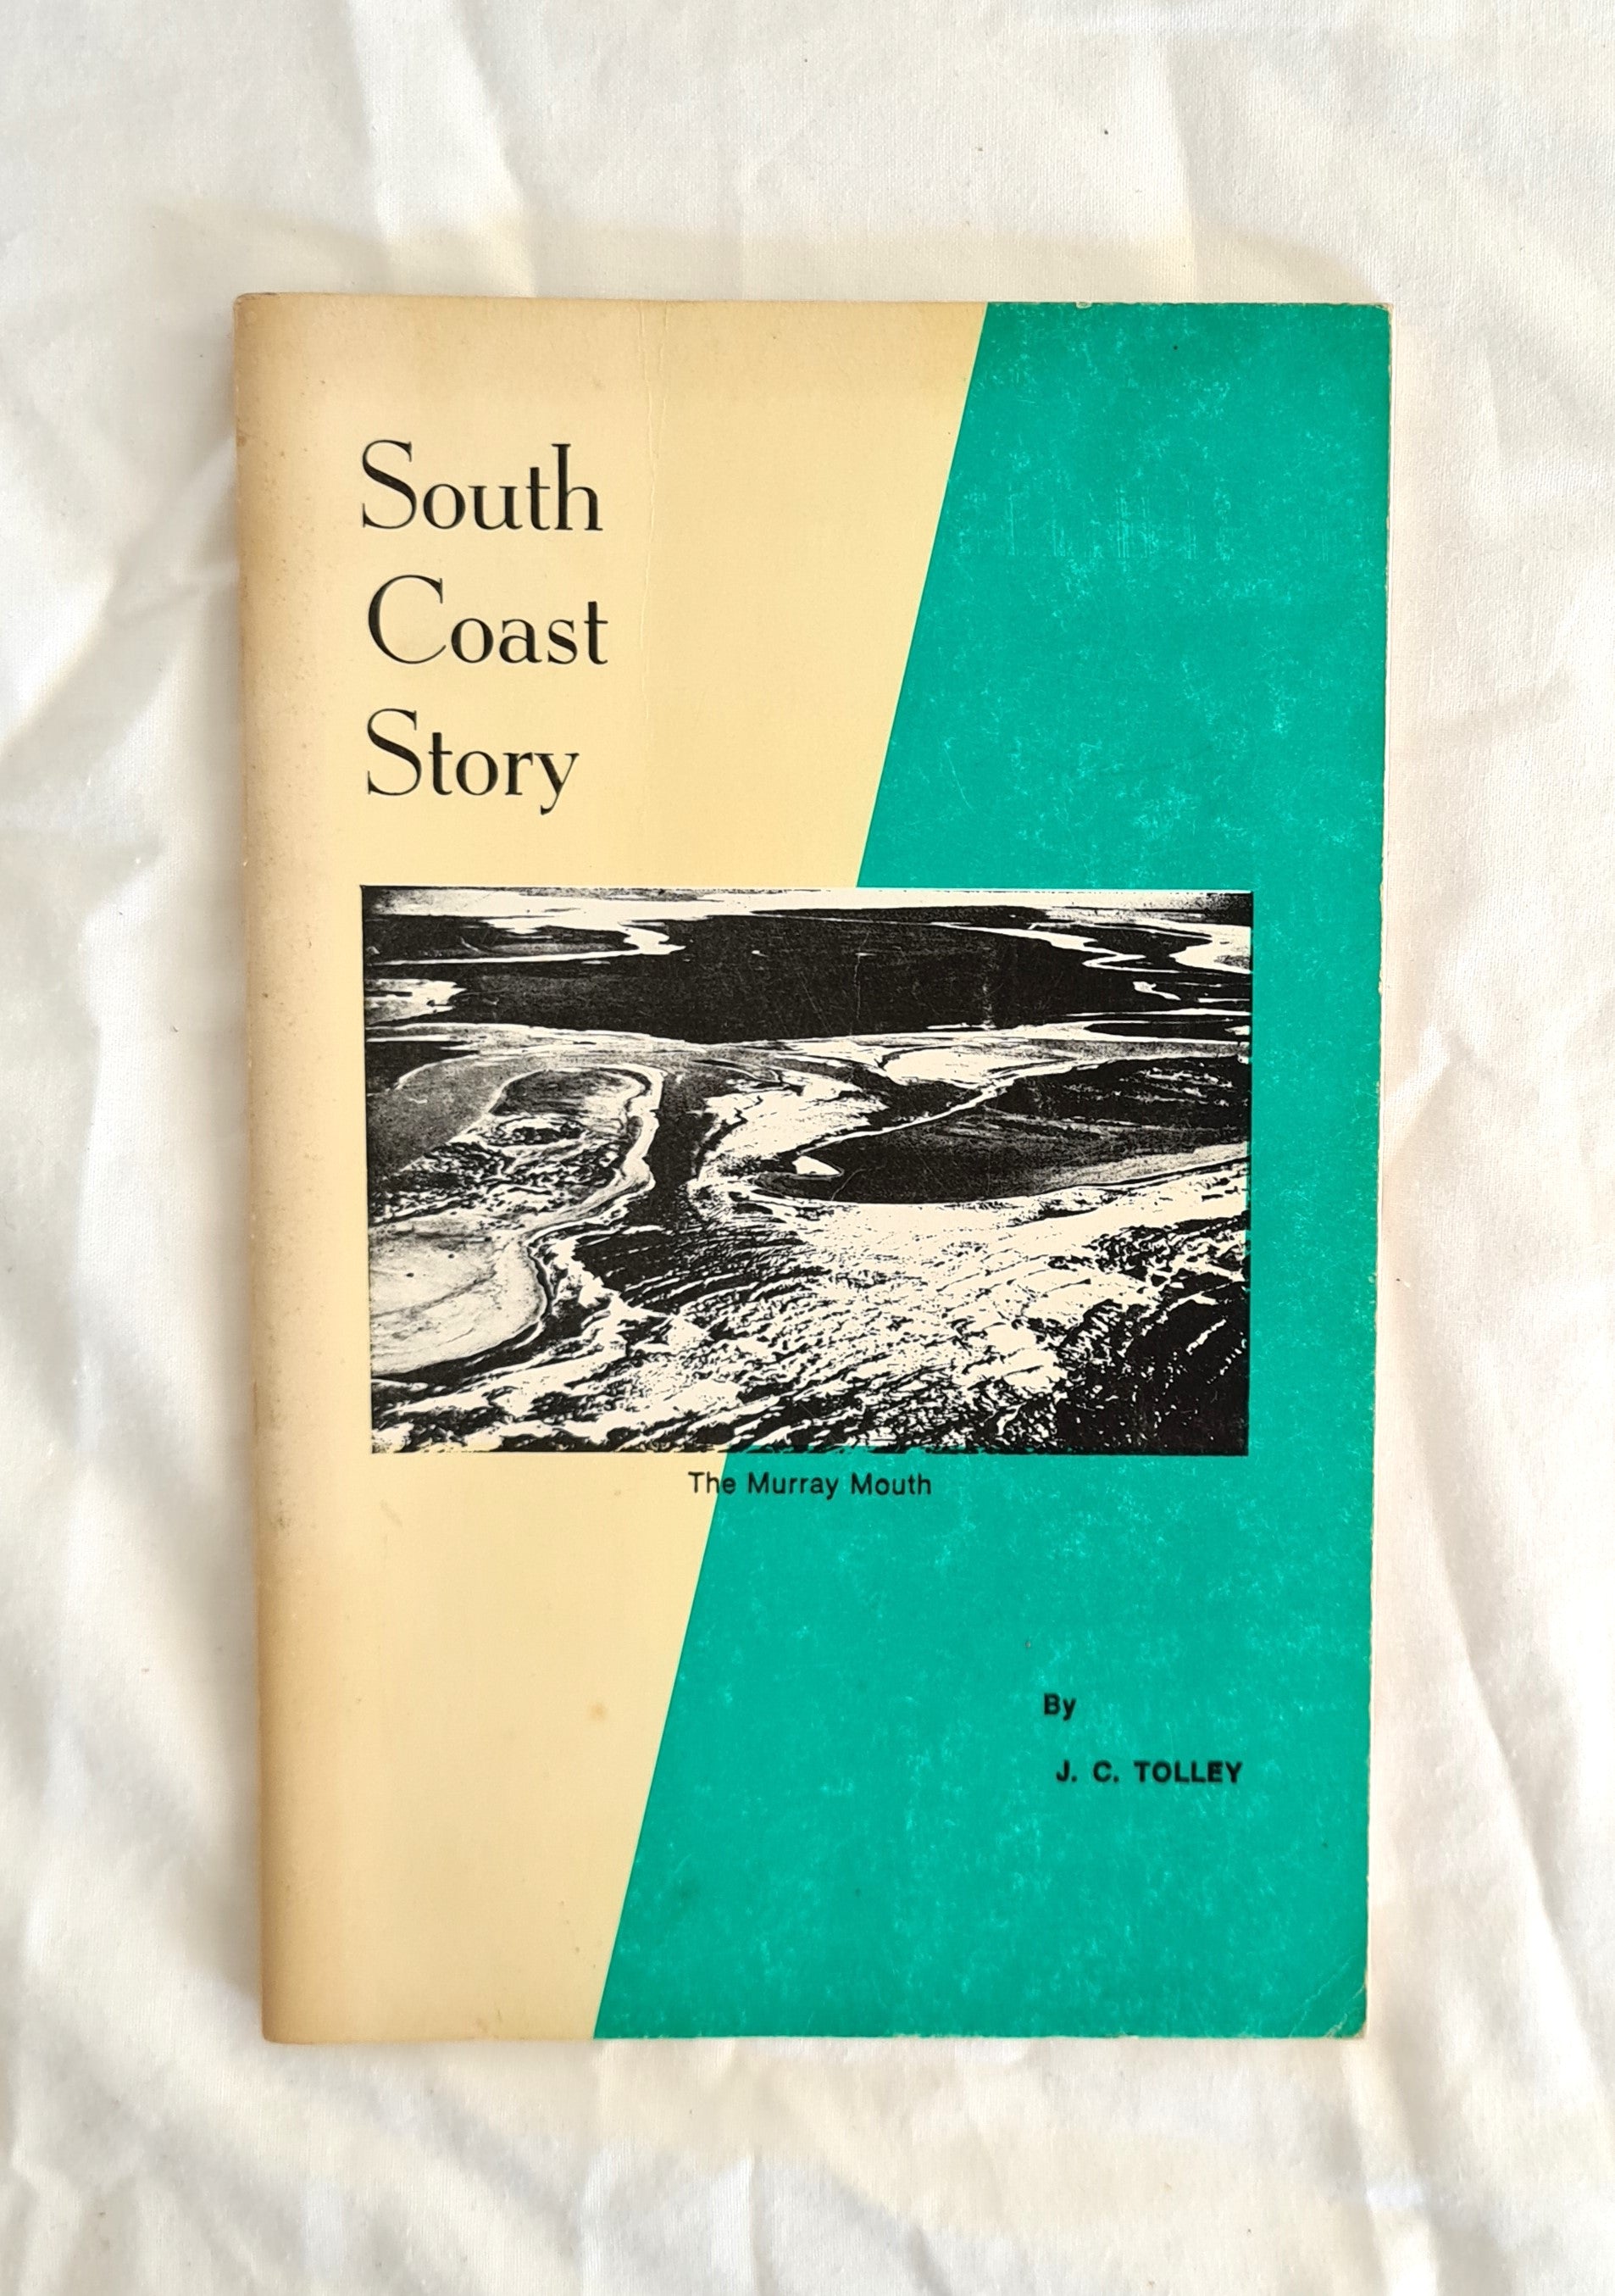 South Coast Story  A History of Goolwa Port Elliot Middleton and The Murray Mouth  by J. C. Tolley